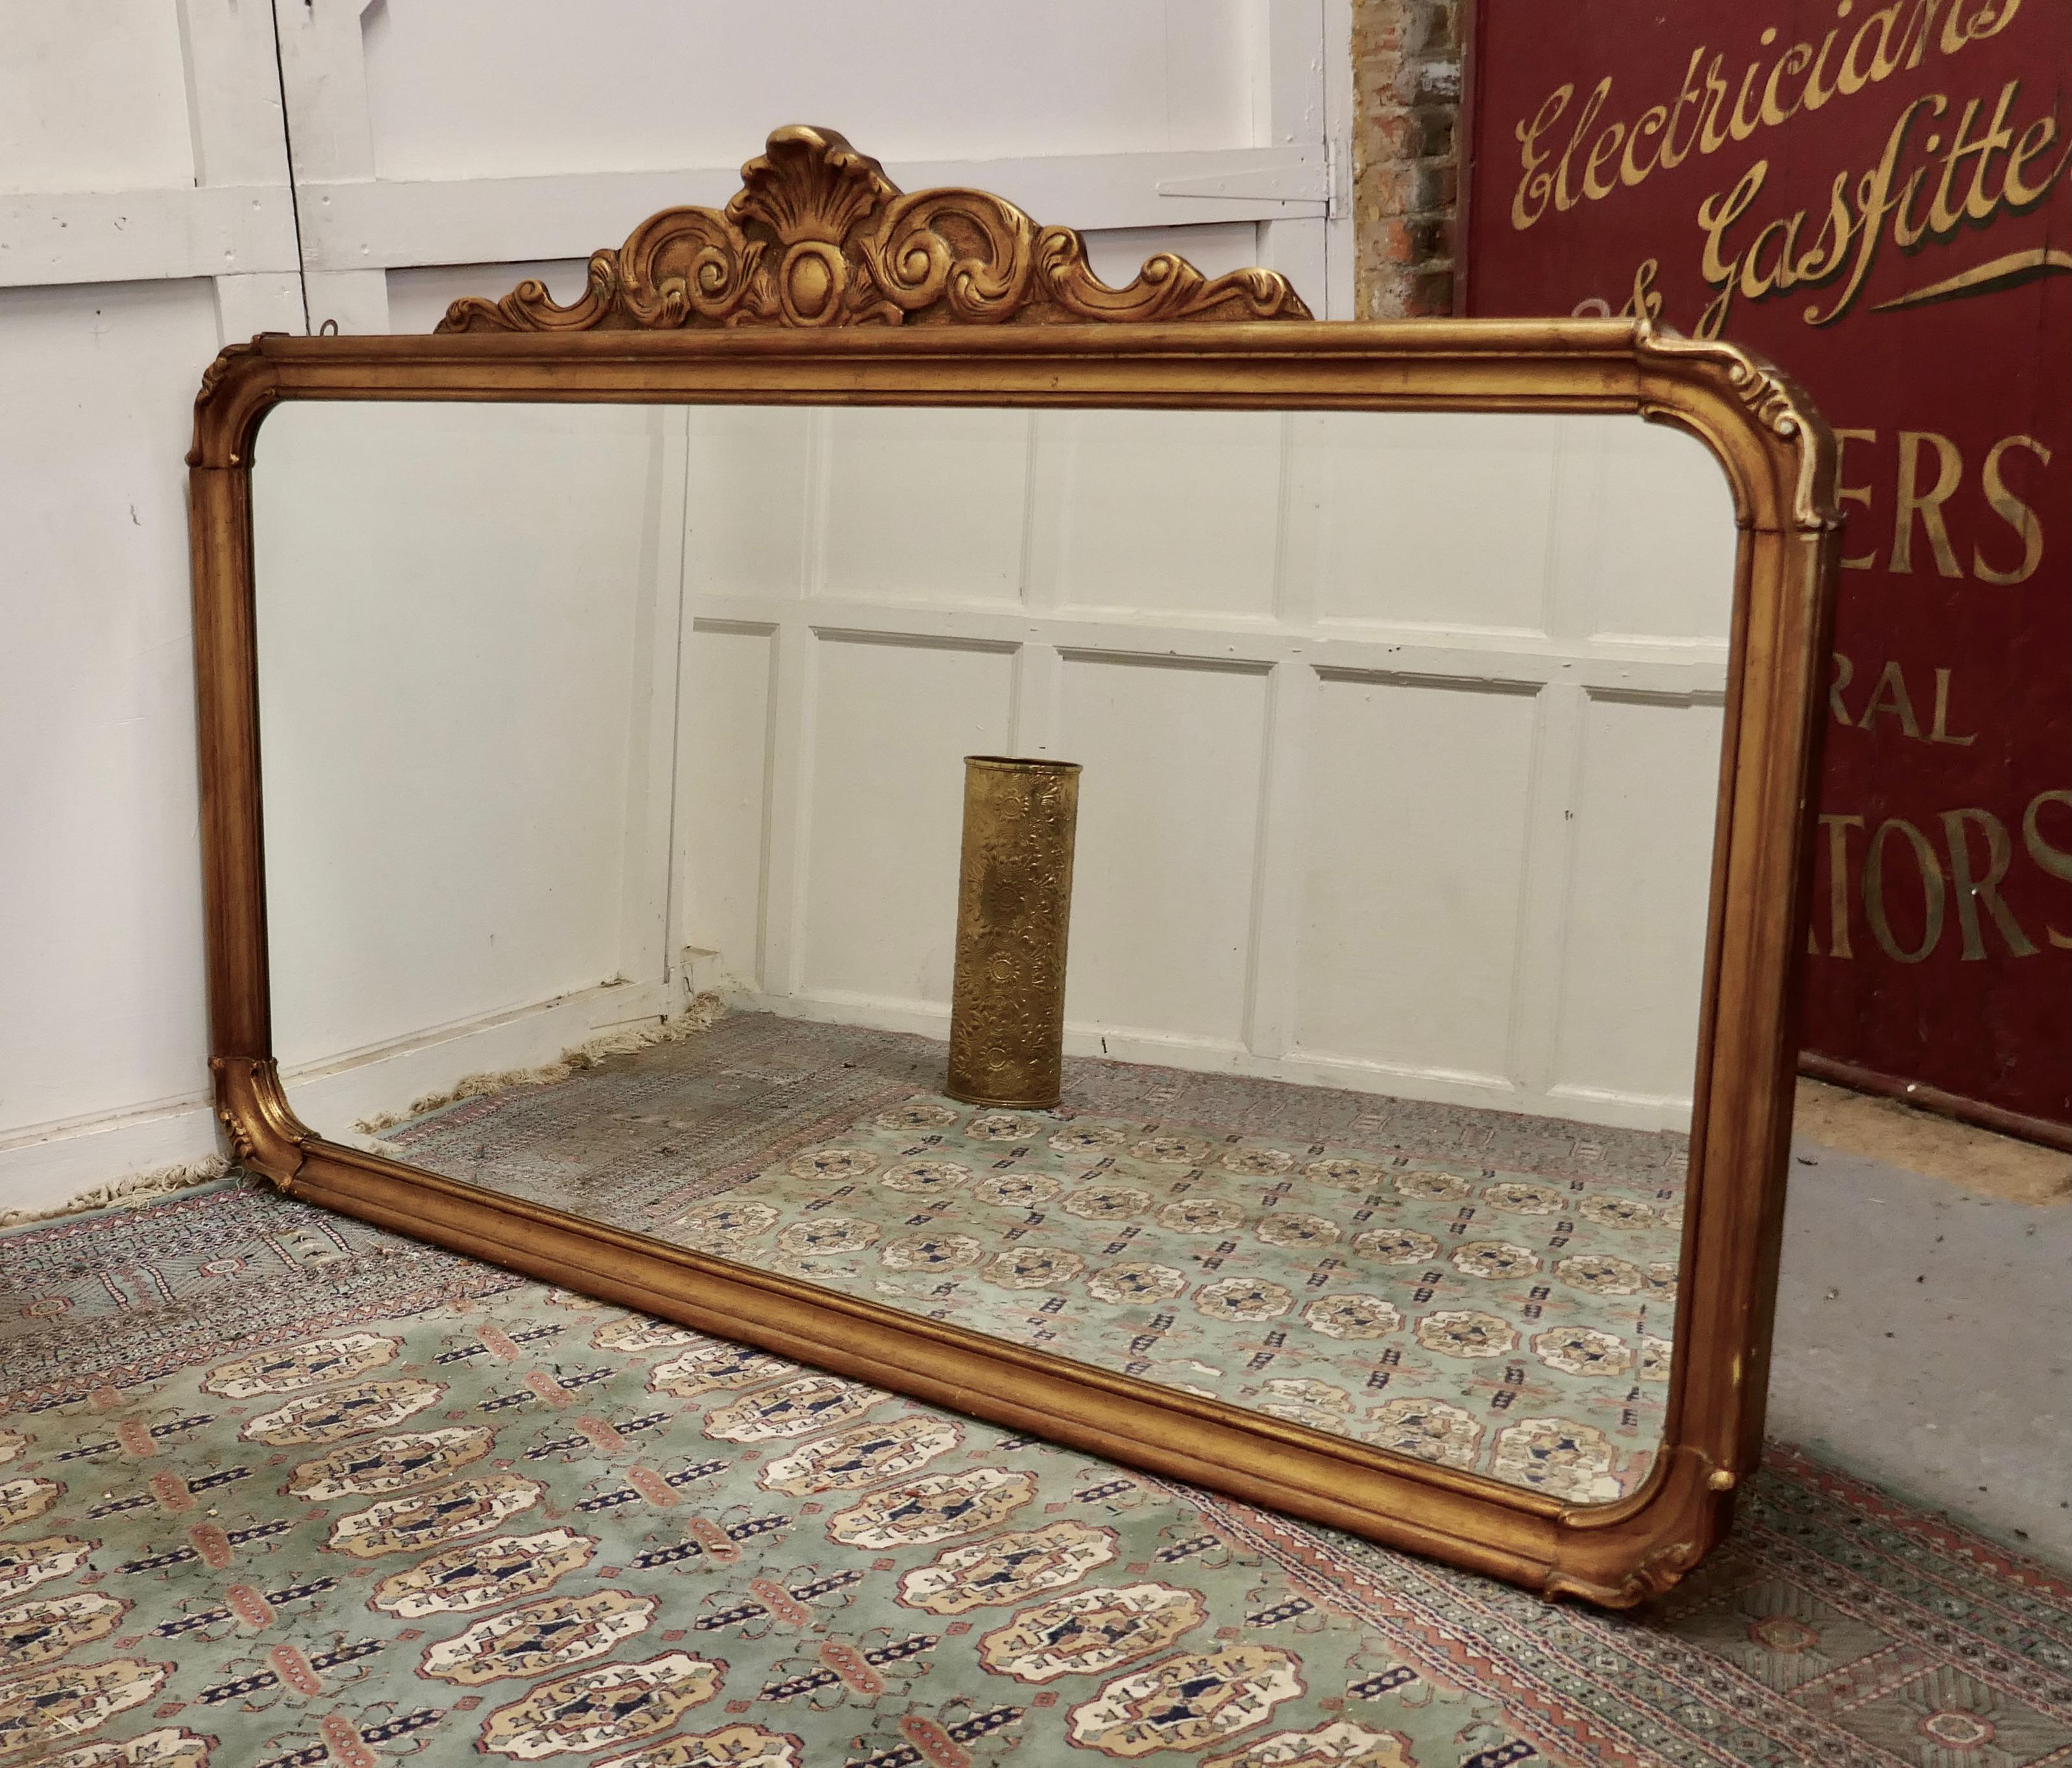 A superb large French gilt overmantel mirror

This is a Striking piece it has a rectangular shape with curved corners there is a carved decoration at the top with entwined leaves and shell 
The mirror is a 20th Century piece in a lovely aged rich